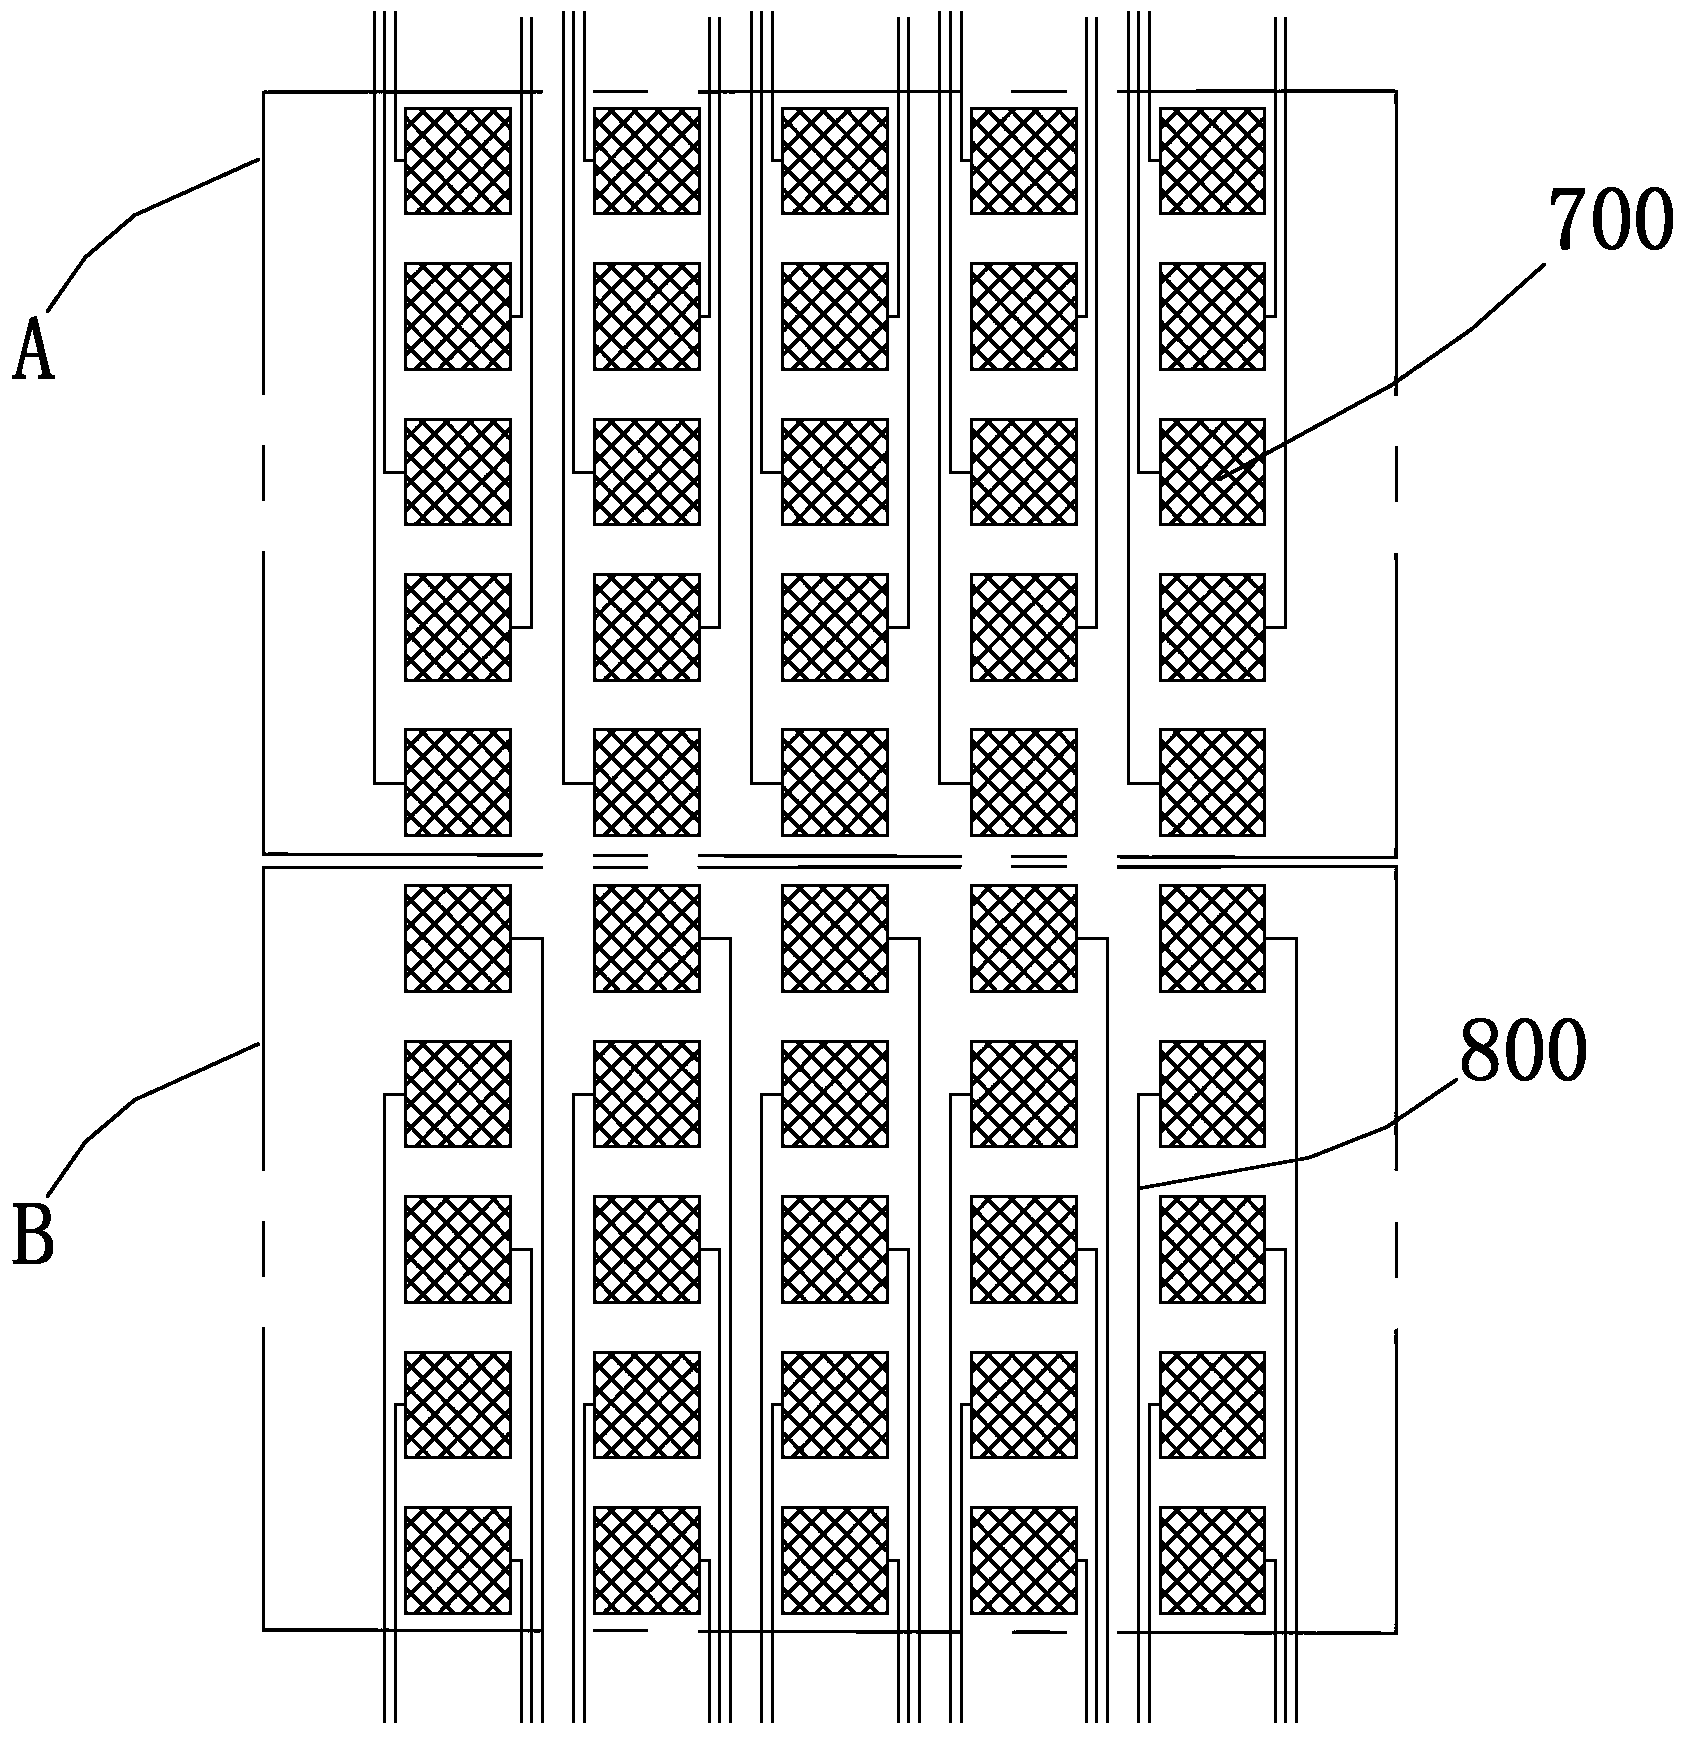 Single-layer multi-point capacitive touch screen